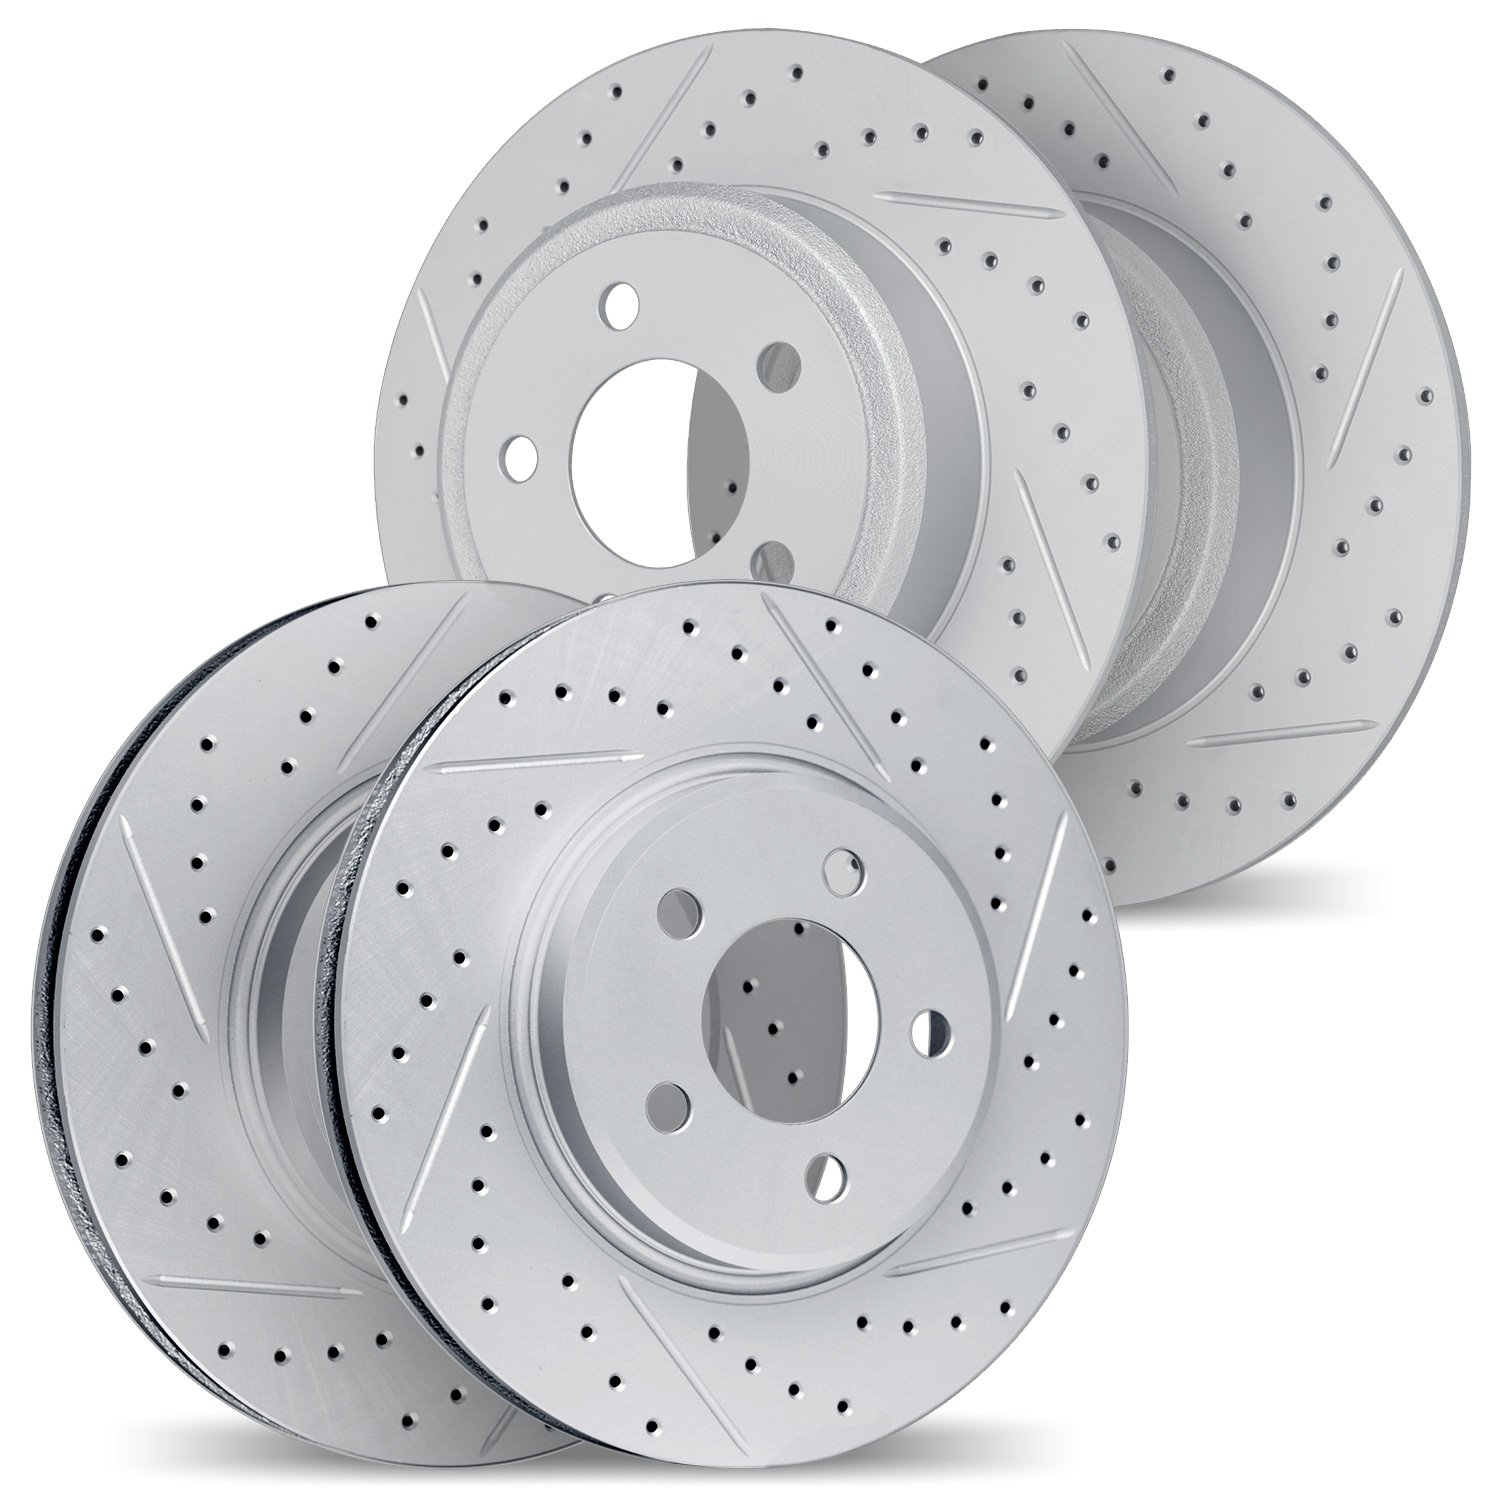 2004-72008 Geoperformance Drilled/Slotted Brake Rotors, 1994-2000 Multiple Makes/Models, Position: Front and Rear